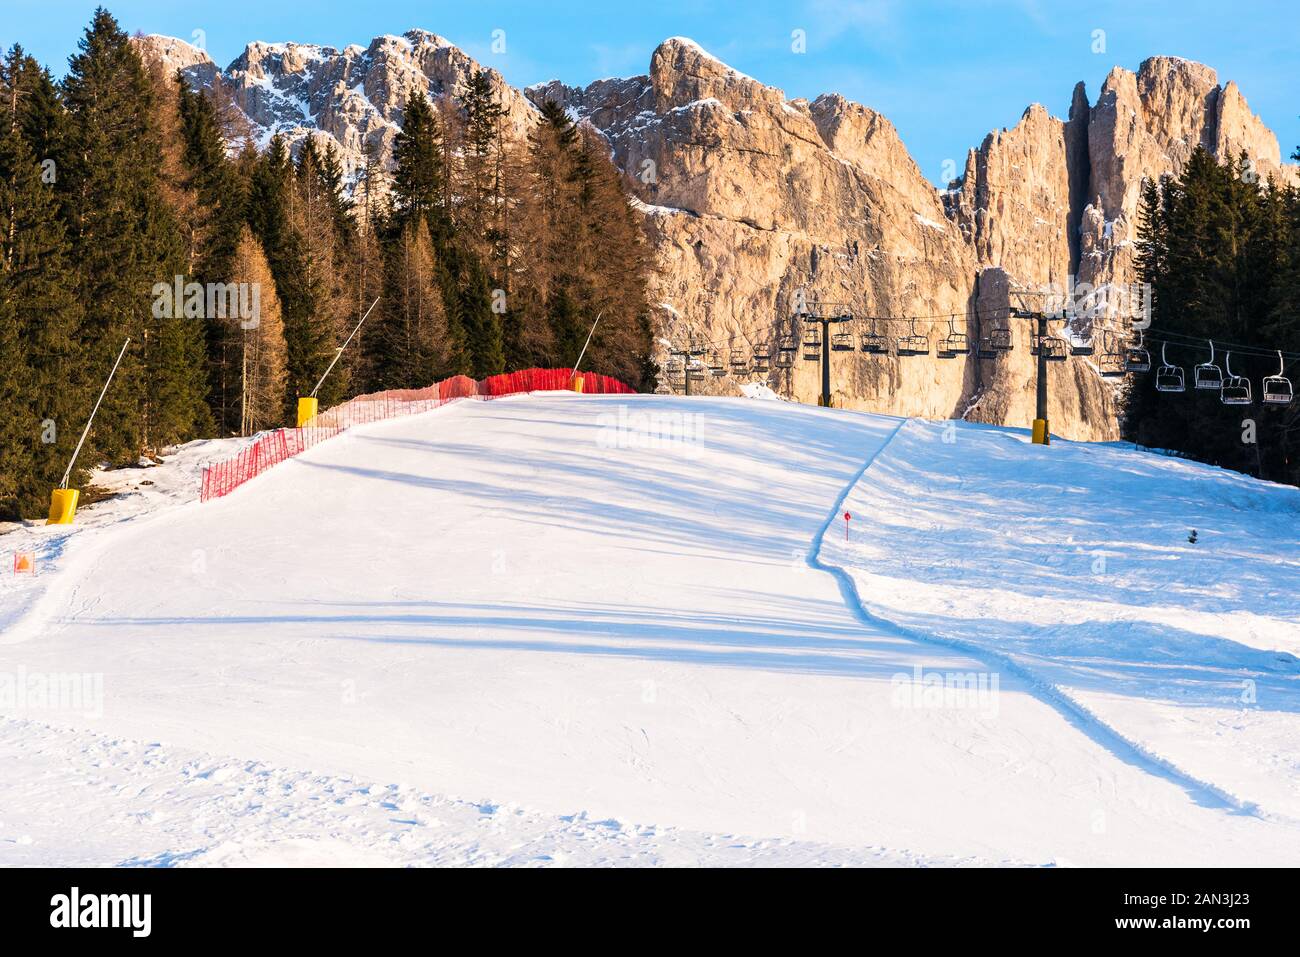 Deserted ski slope with a chair lift in background at the foot of towering rocky peaks in the Dolomites on a clear winter afternoon Stock Photo